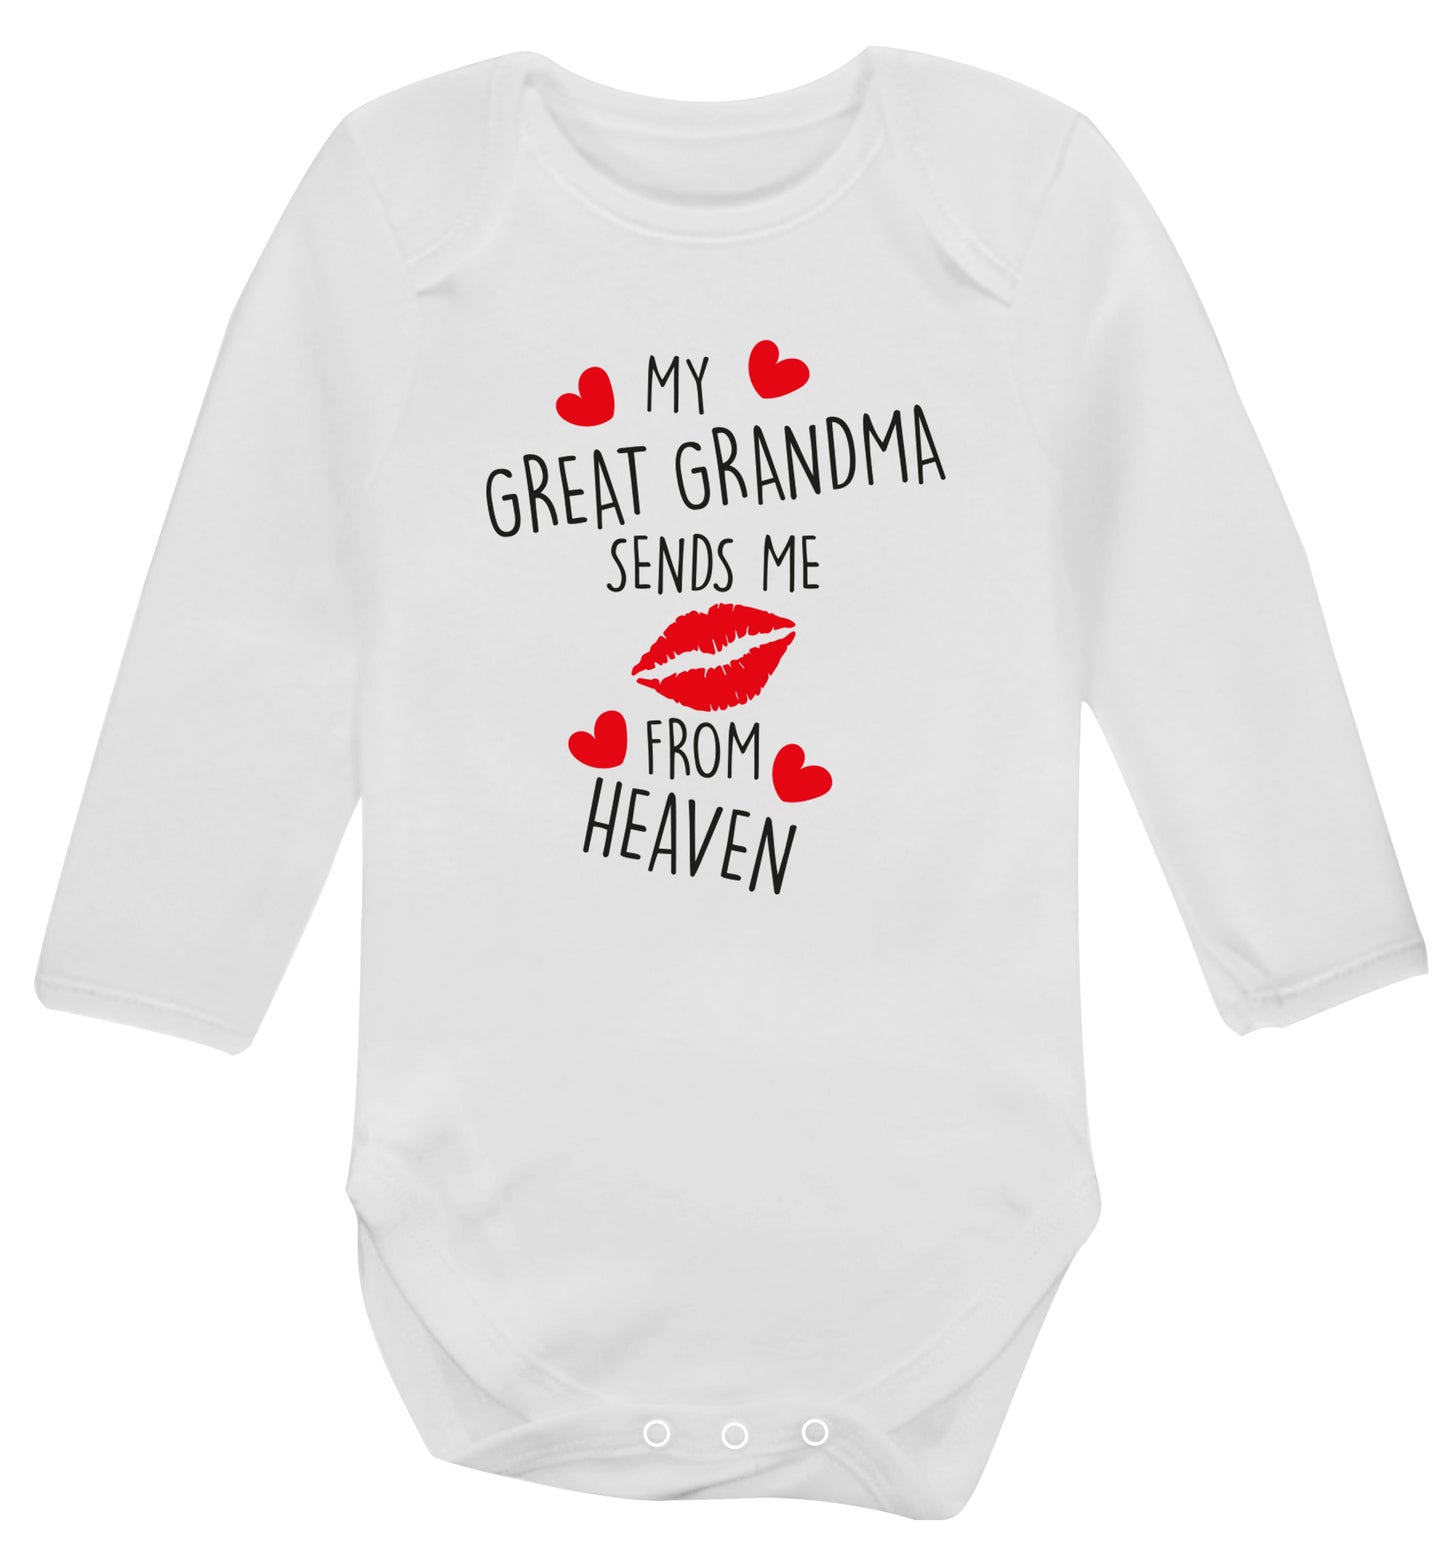 My great grandma sends me kisses from heaven Baby Vest long sleeved white 6-12 months